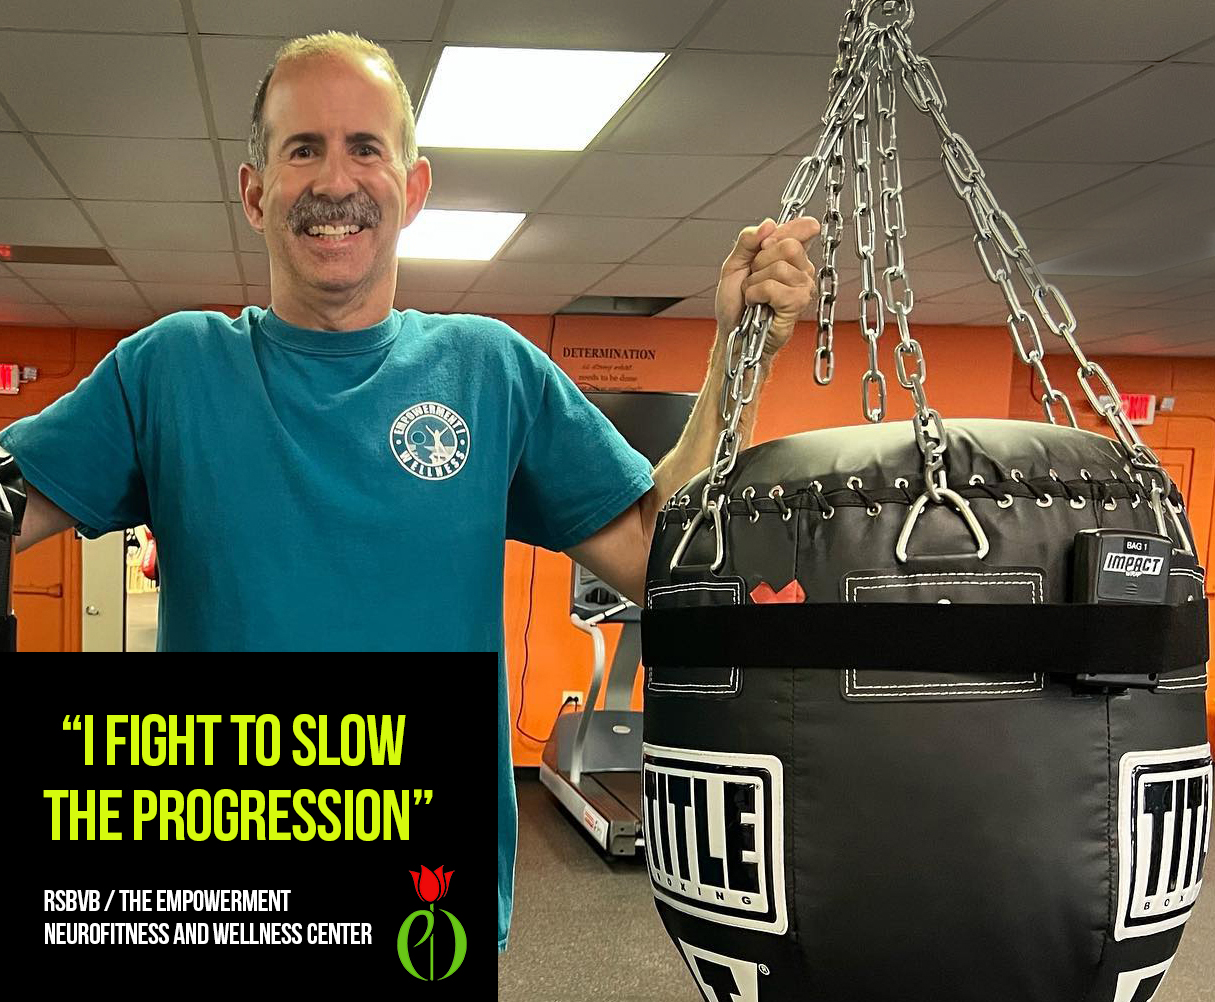 Man with Parkinson's Disease who participates in Rock Steady Boxing stands with a heavy bag fitted with an Impact Wrap sensor.